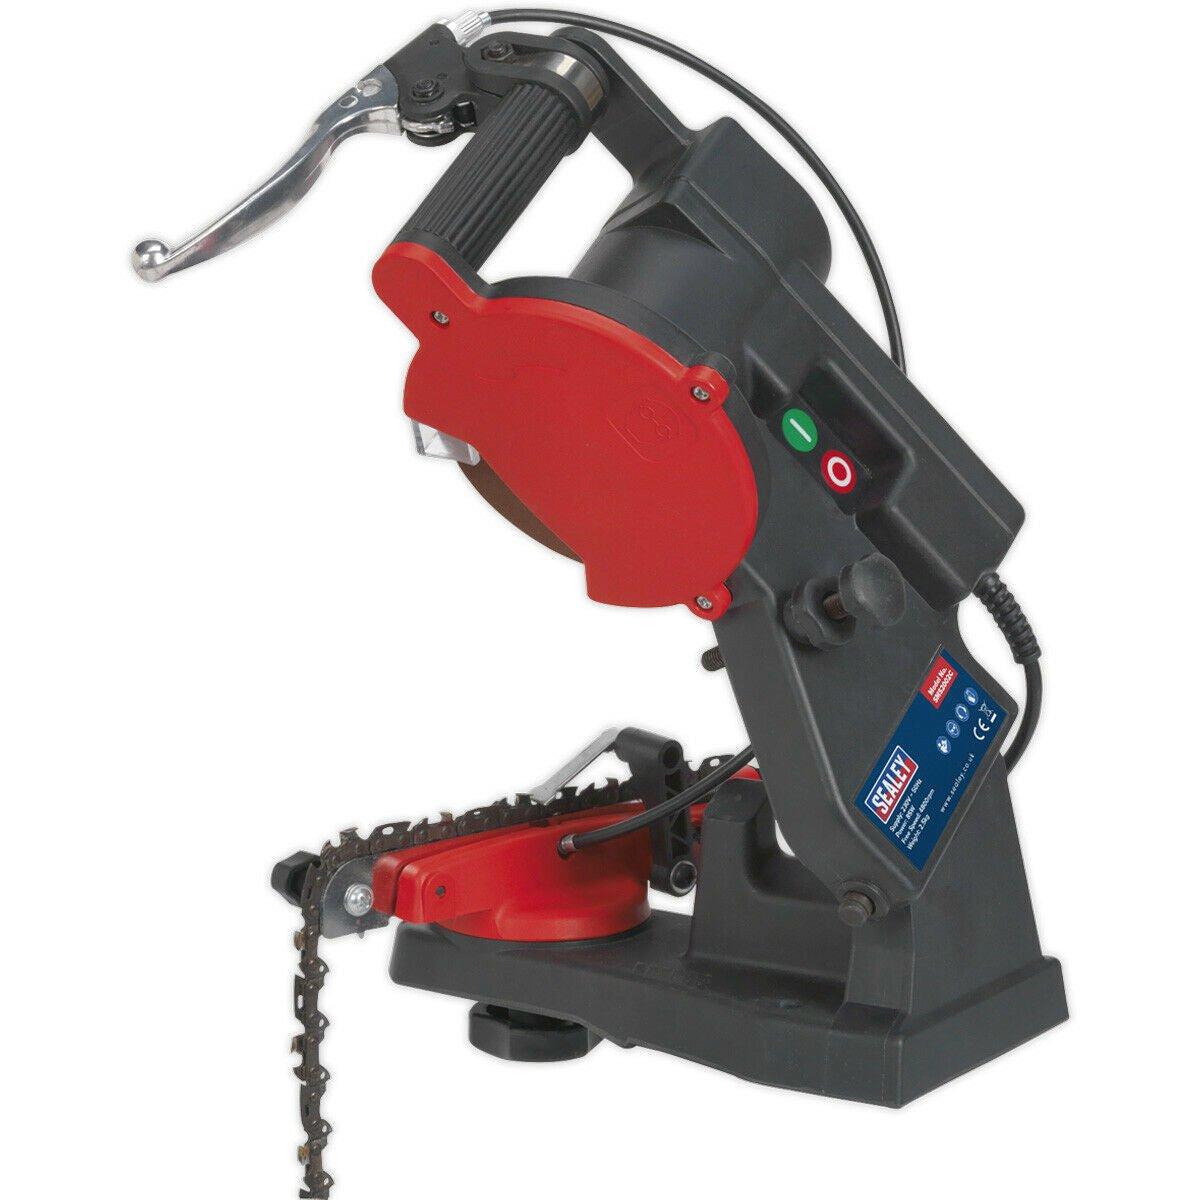 85W Chainsaw Blade Sharpener - 4800 RPM - Chain Guide & Angle Adjustment